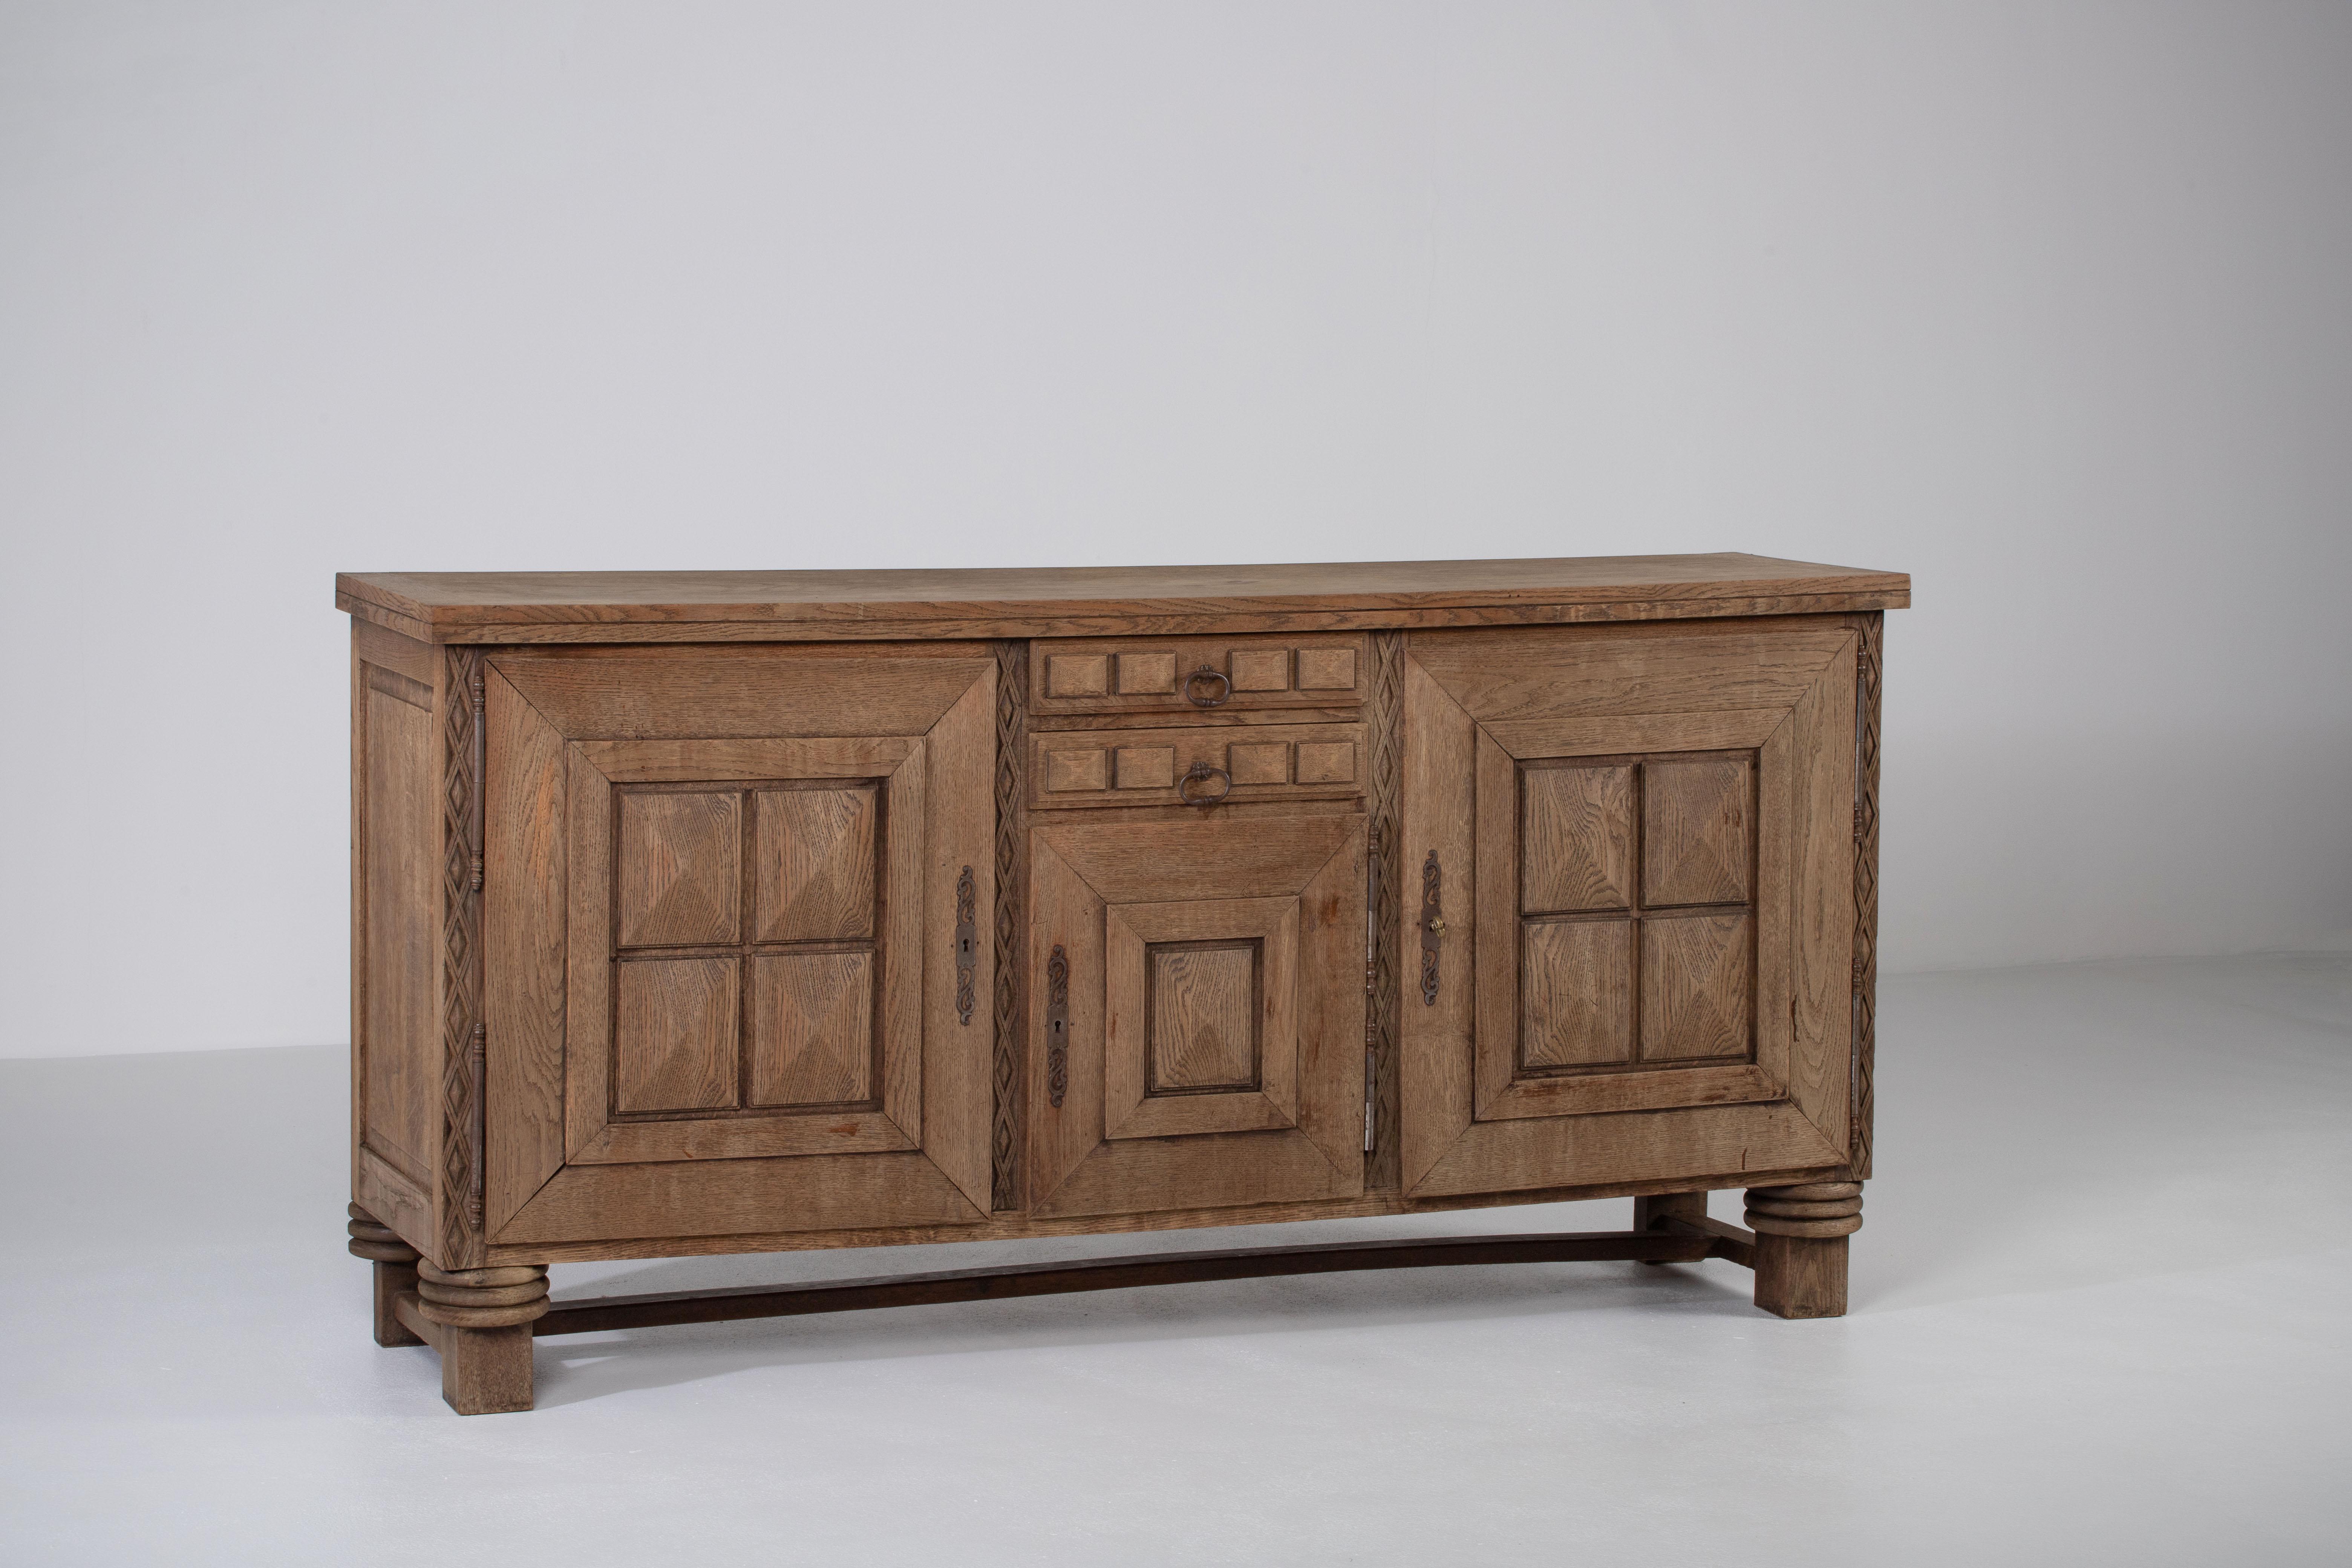 Bleached Solid Oak Credenza with Graphic Details, France, 1940s For Sale 2